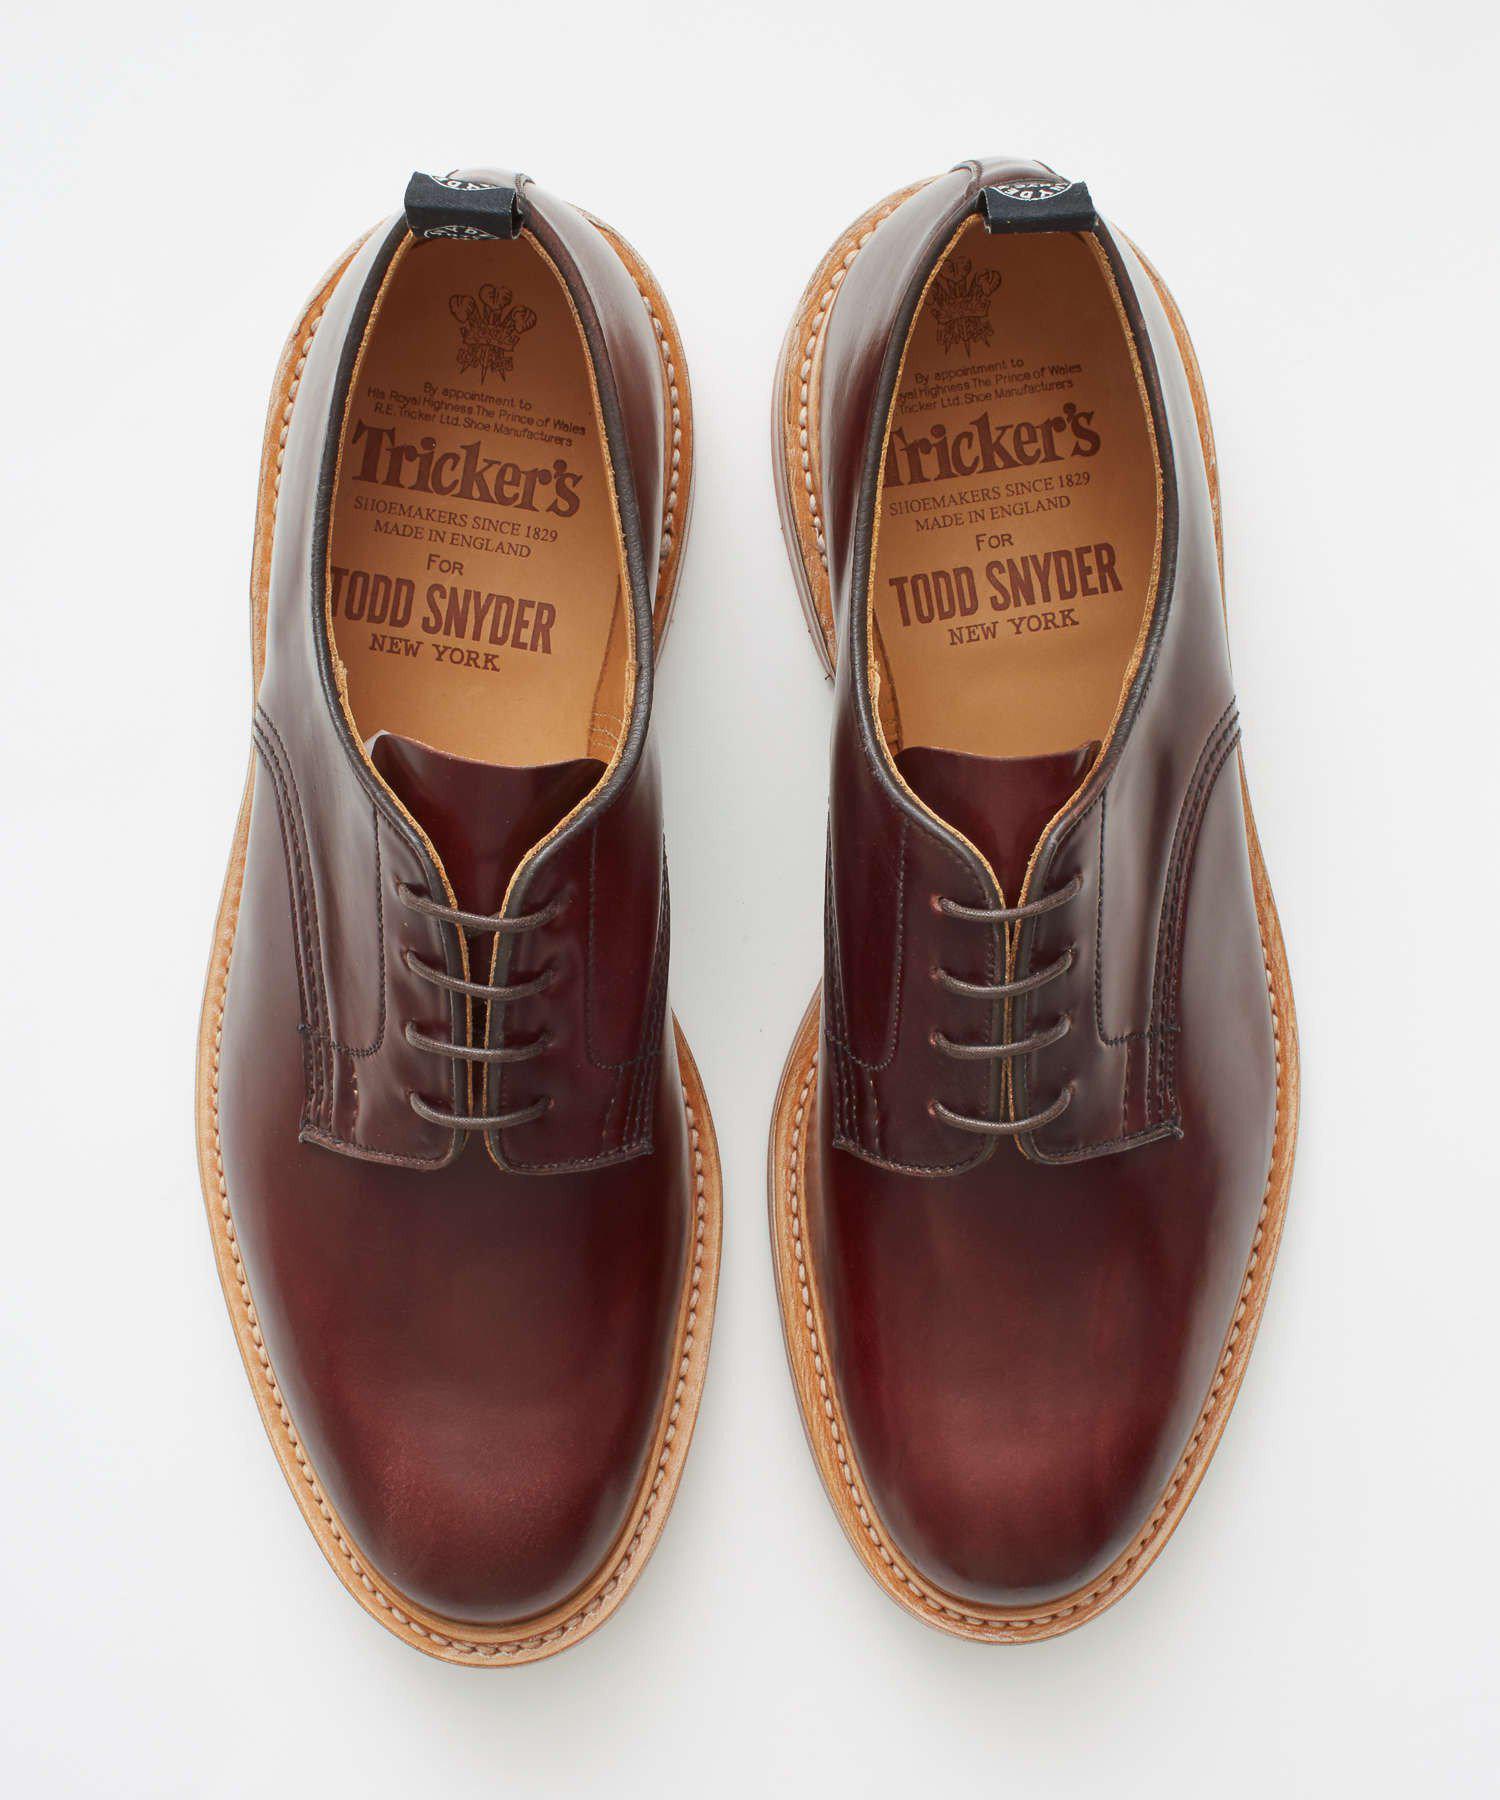 Tricker's Men's Limited Edition Cordovan Leather Derby Shoe